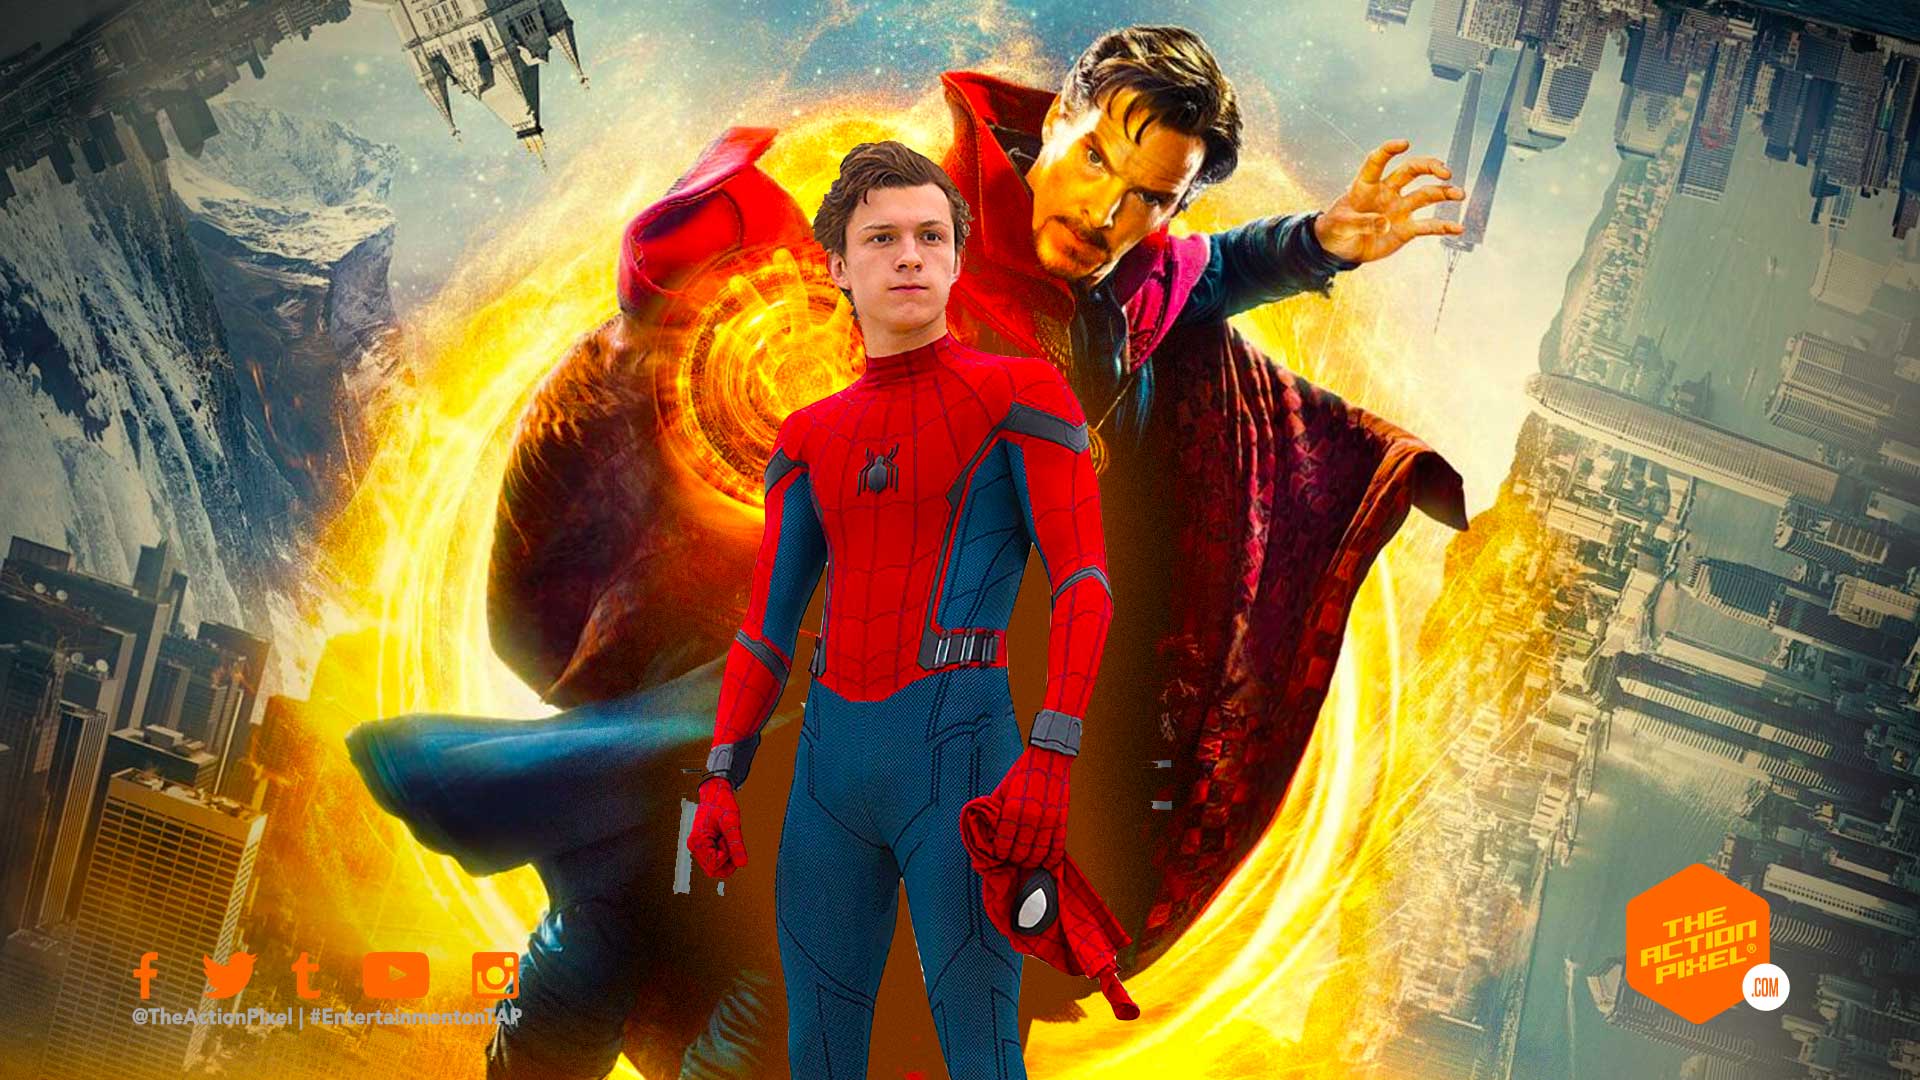 doctor strange, doctor strange in the multiverse of madness, the action pixel, entertainment on tap, spider-man, spider-man 3, entertainment on tap, peter parker, benedict cumberbatch, tom holland, sony pictures, marvel studios, mcu spiderman, mcu spider-man, spider-man 3 movie, mcu spiderman 3,